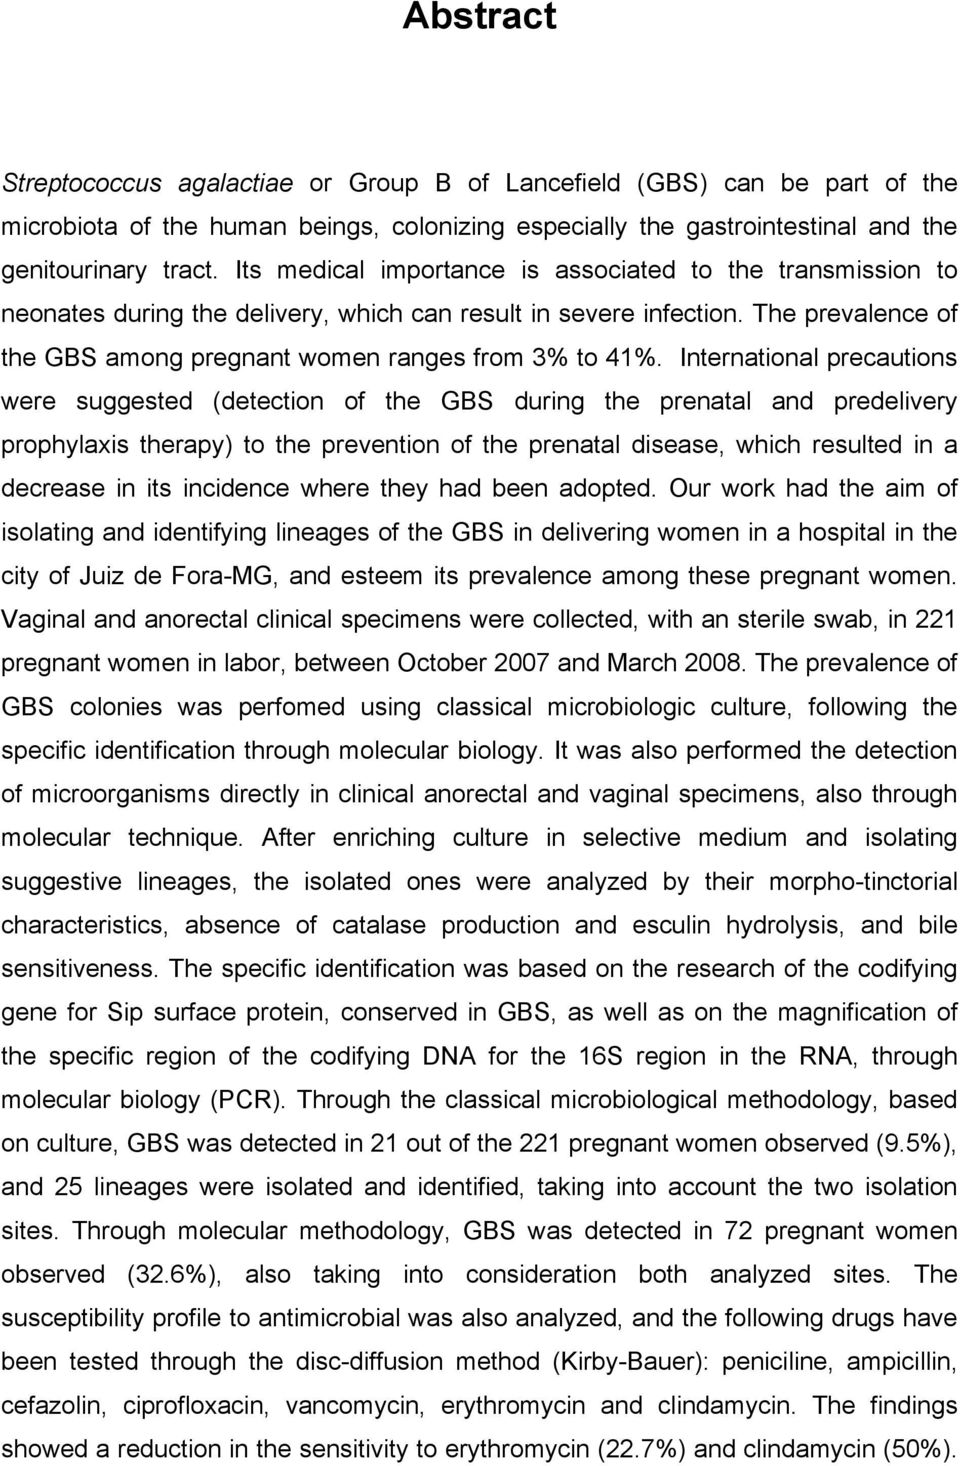 International precautions were suggested (detection of the GBS during the prenatal and predelivery prophylaxis therapy) to the prevention of the prenatal disease, which resulted in a decrease in its